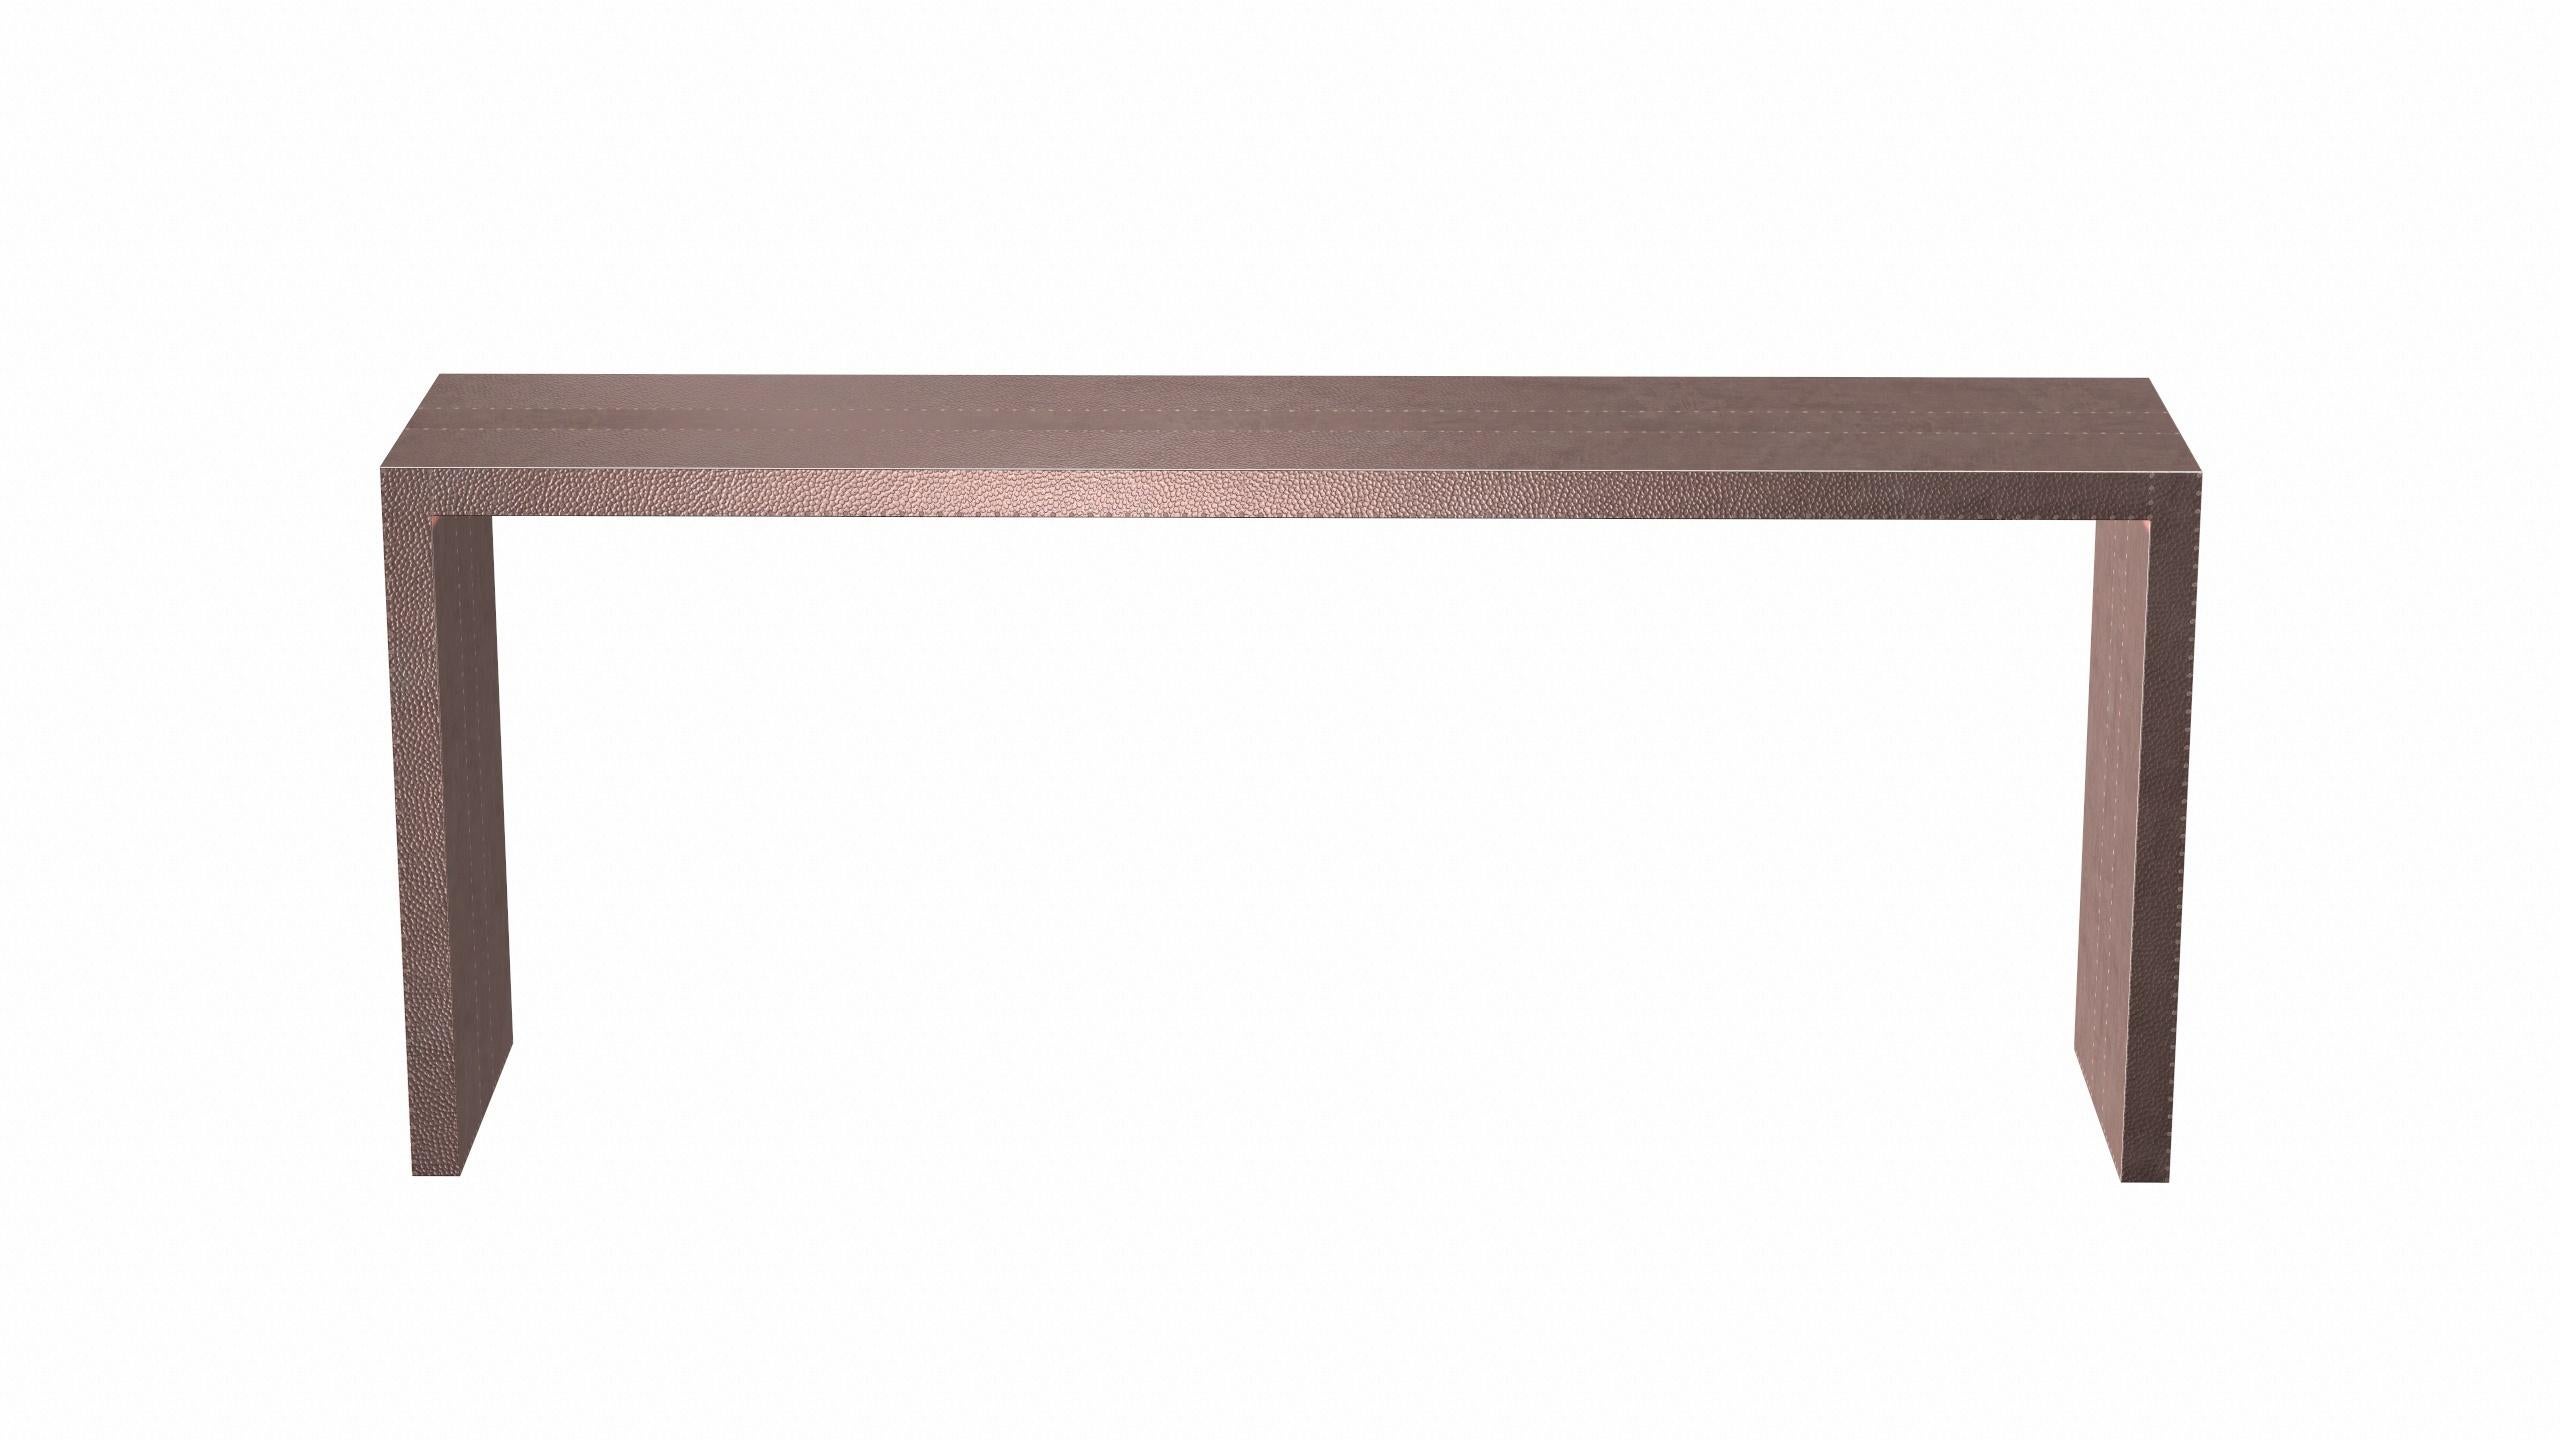 Hand-Carved Art Deco Rectangular Console Tables Mid. Hammered Copper by Alison Spear For Sale